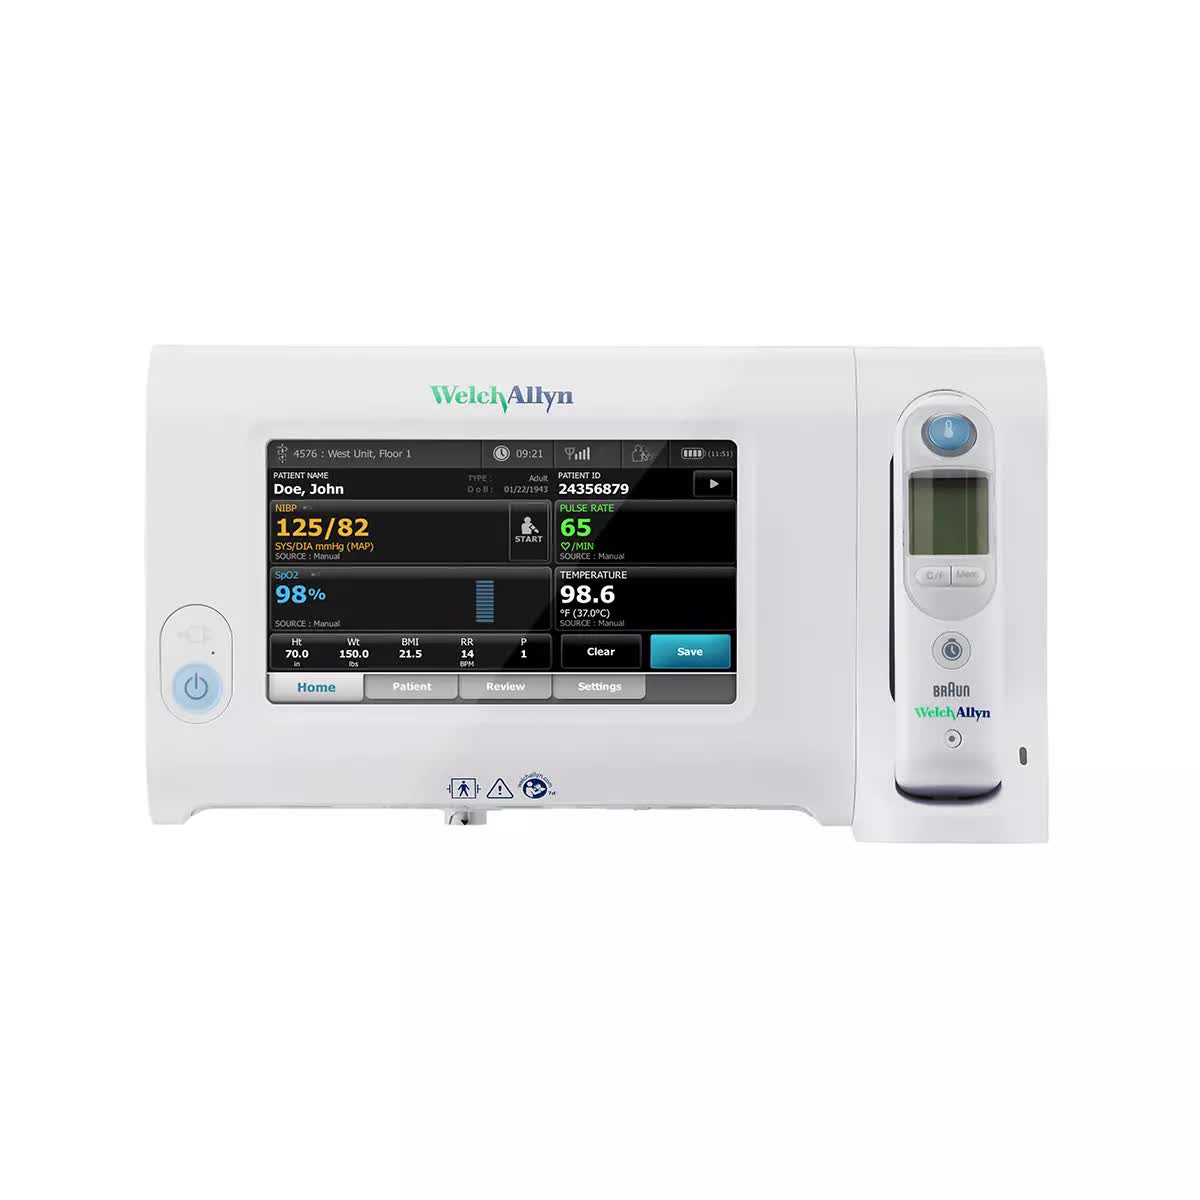 Welch Allyn Connex 7300 Bluetooth Connectivity Spot Monitor with Masimo SpO2 and Braun Pro6000